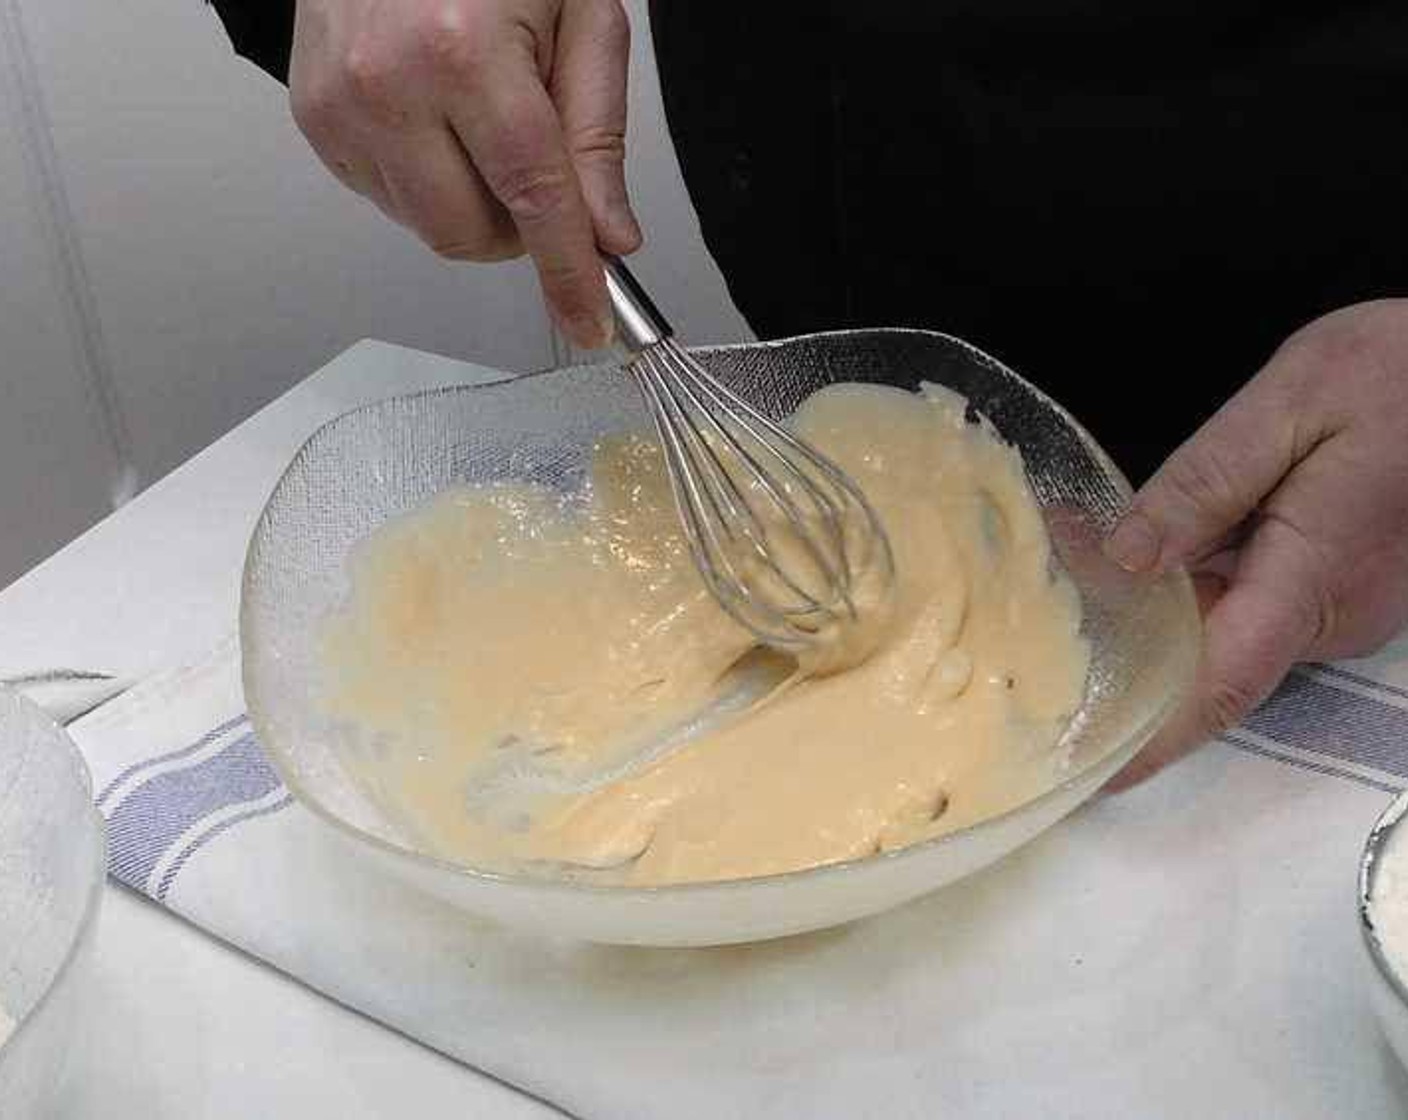 step 2 In a bowl beat the Egg (1). Add in All-Purpose Flour (to taste) and mix with egg and Baking Powder (1 tsp). Keep adding flour until you have a thick but still liquid batter, be careful that the batter does not become a paste. Add in Salt (to taste).